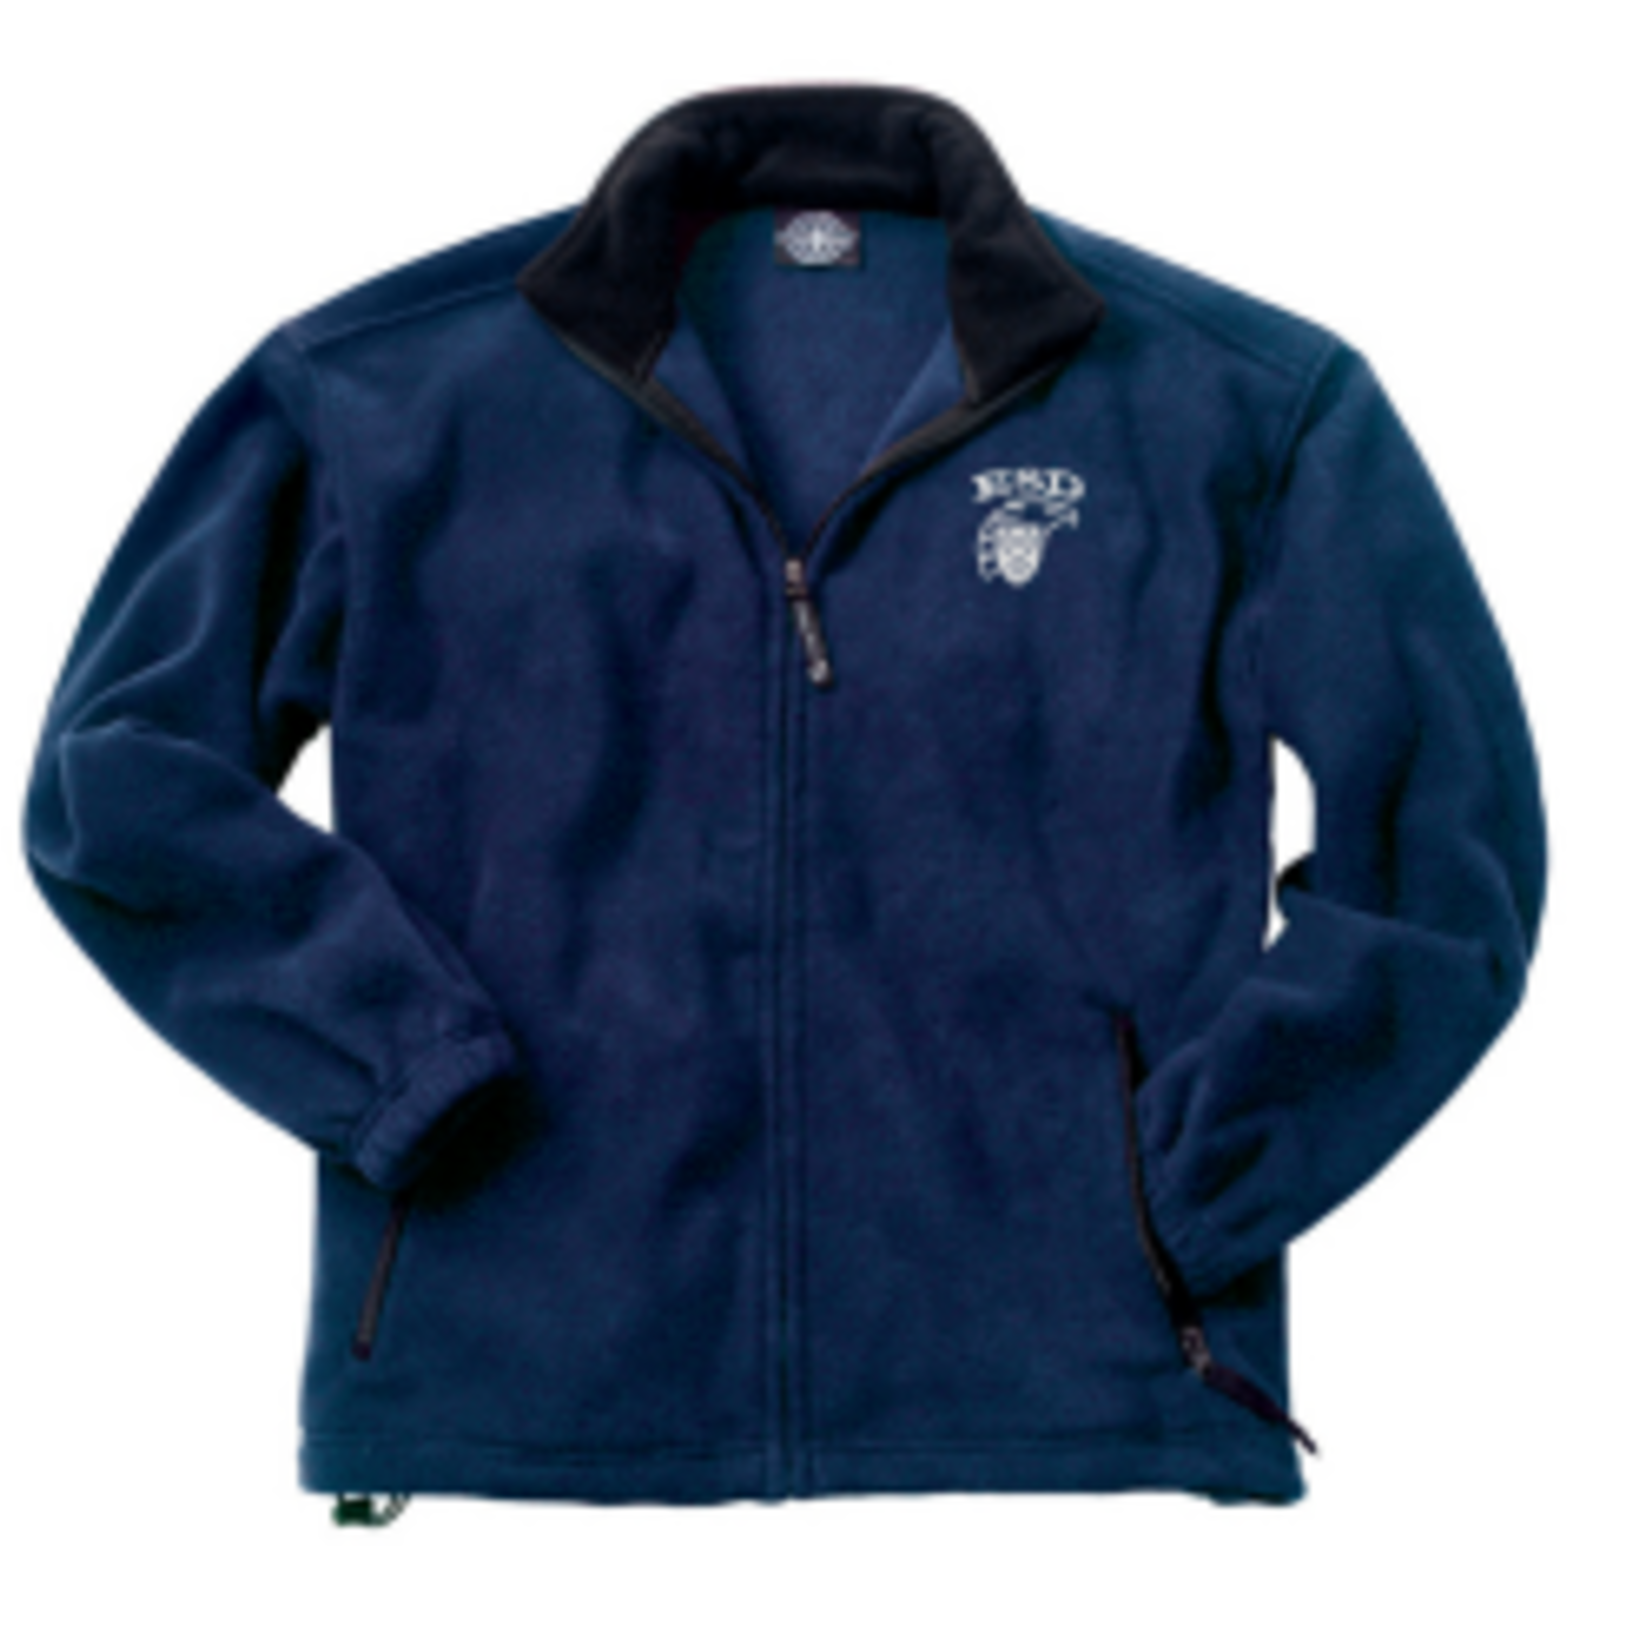 Charles River Youth Voyager Full Zip Jacket